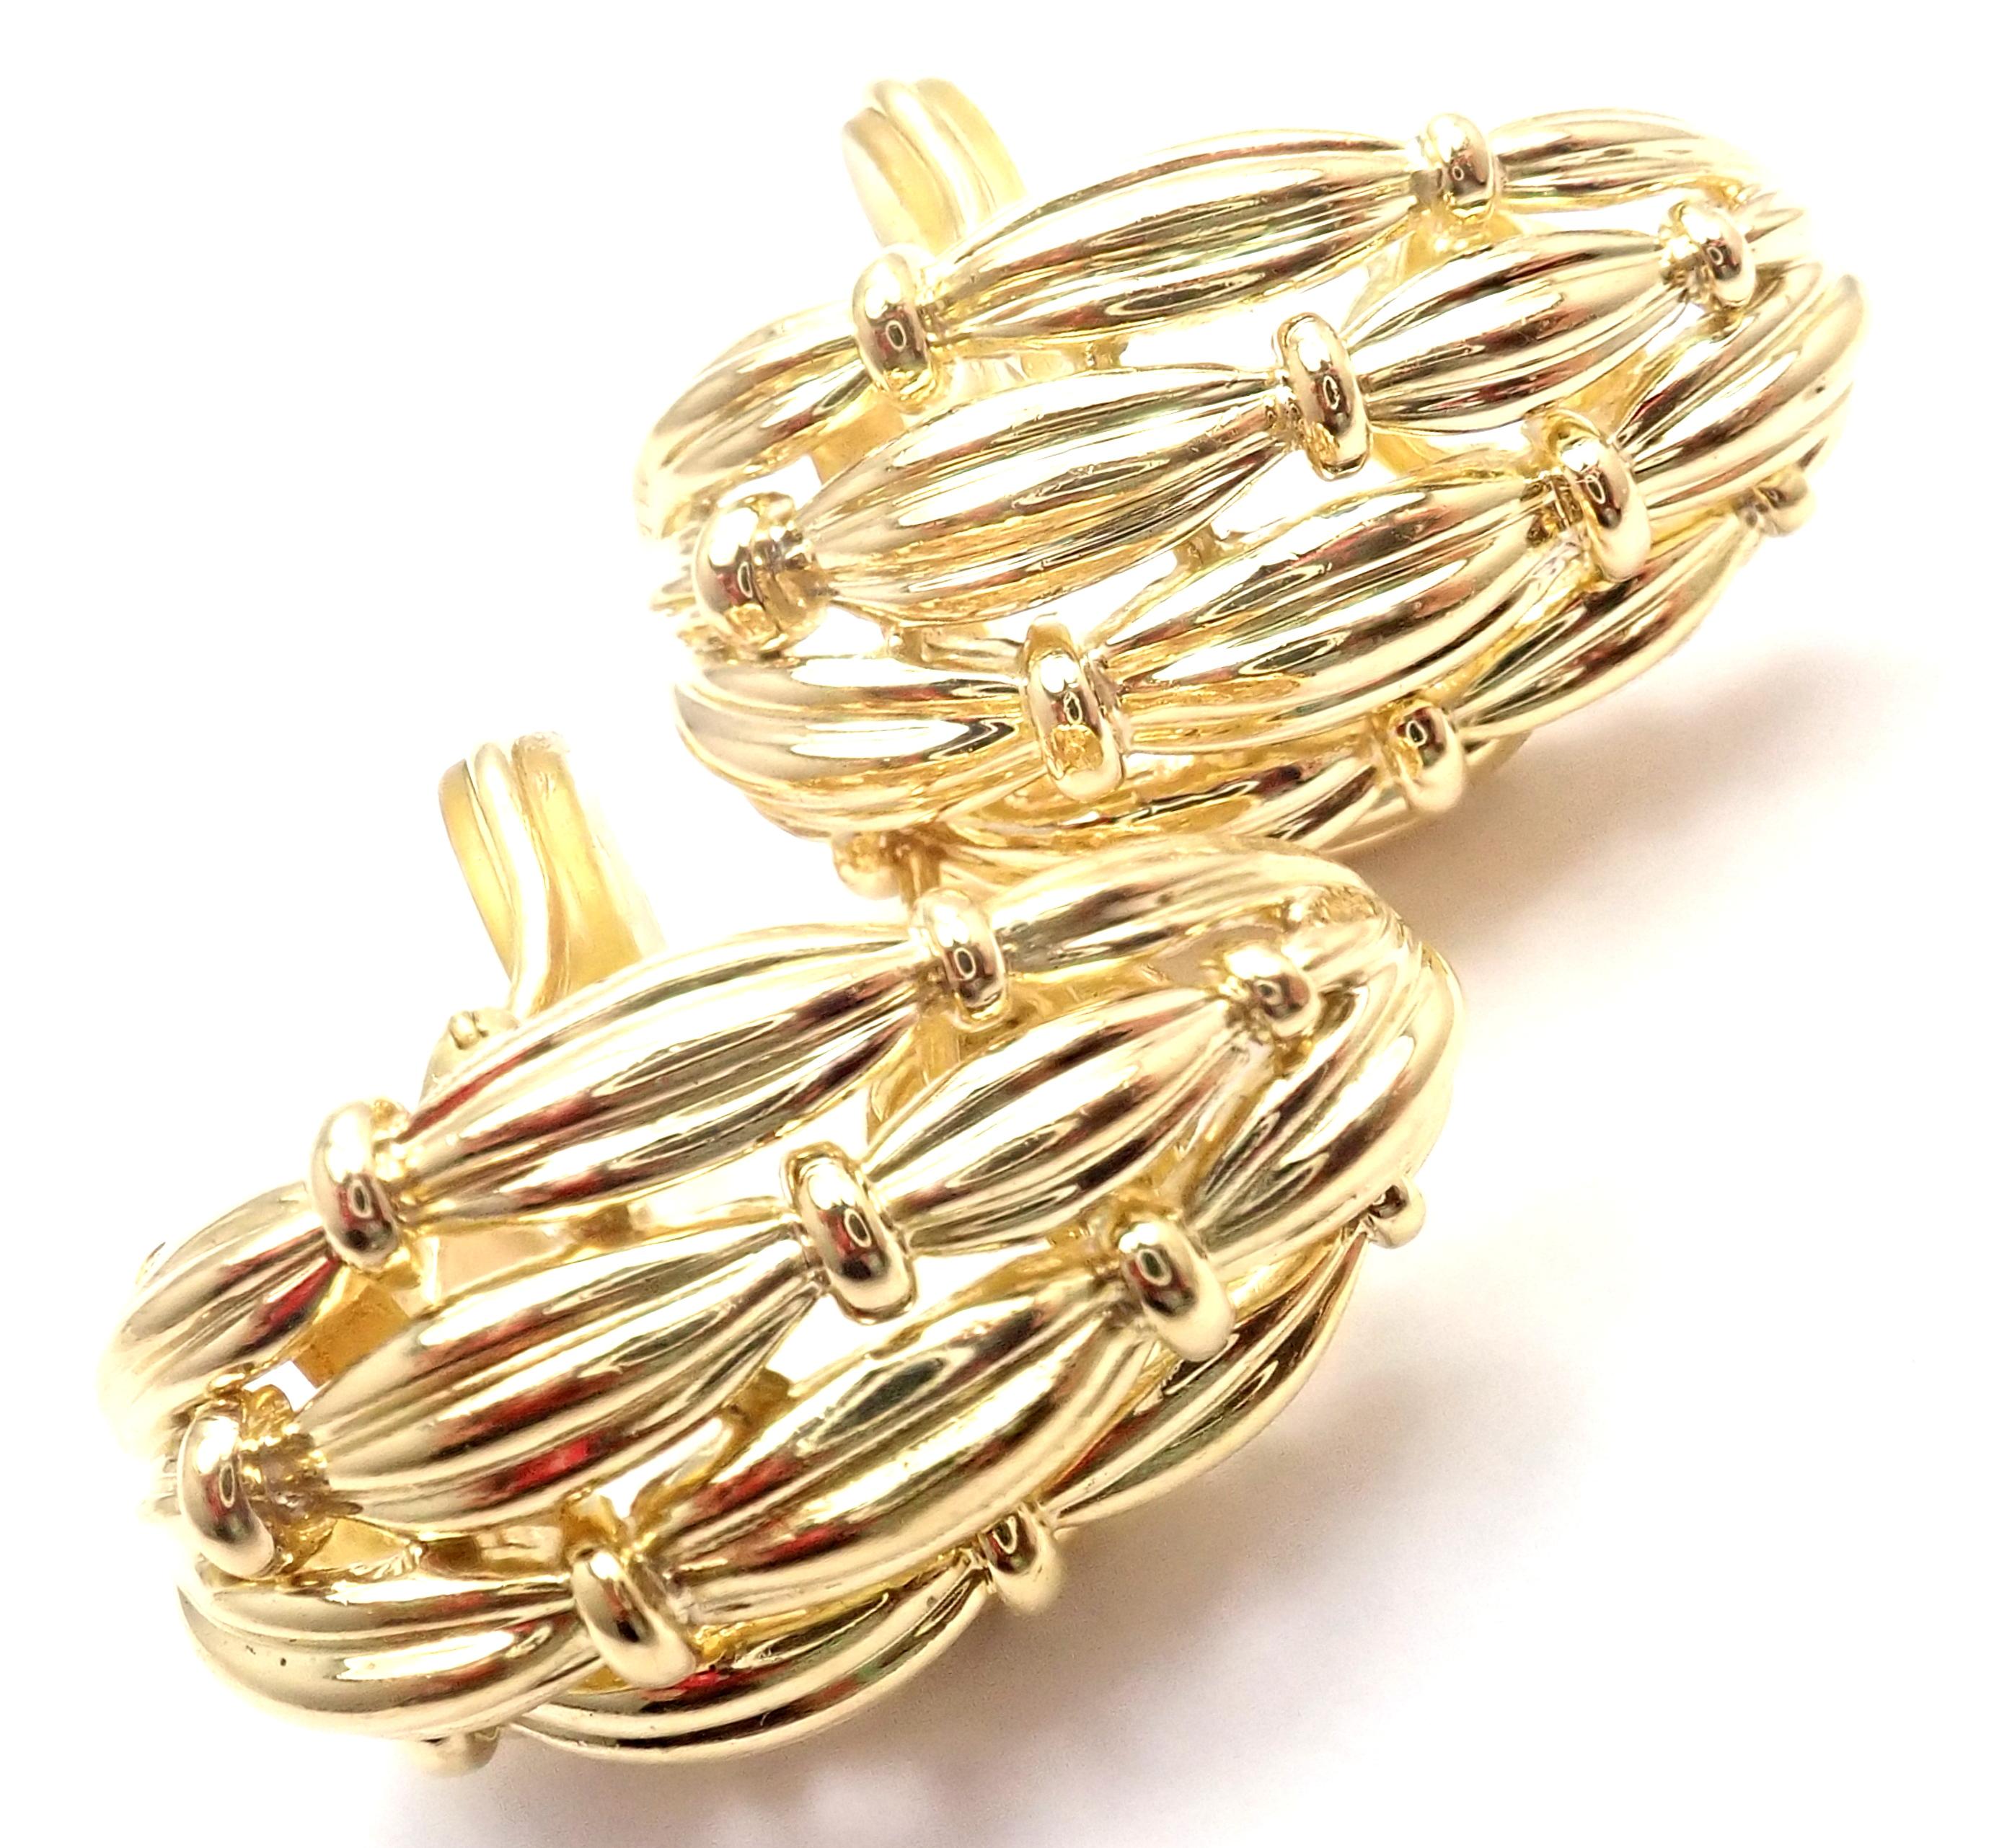 18k Yellow Gold Vintage Woven Basketweave Earrings by Tiffany & Co.
These earrings are made for pierced ears.
Details:
Weight: 20.1 grams
Dimensions: 26mm x 17mm
Stamped Hallmarks: Tiffany & Co, 750, 1992
*Free Shipping within the United